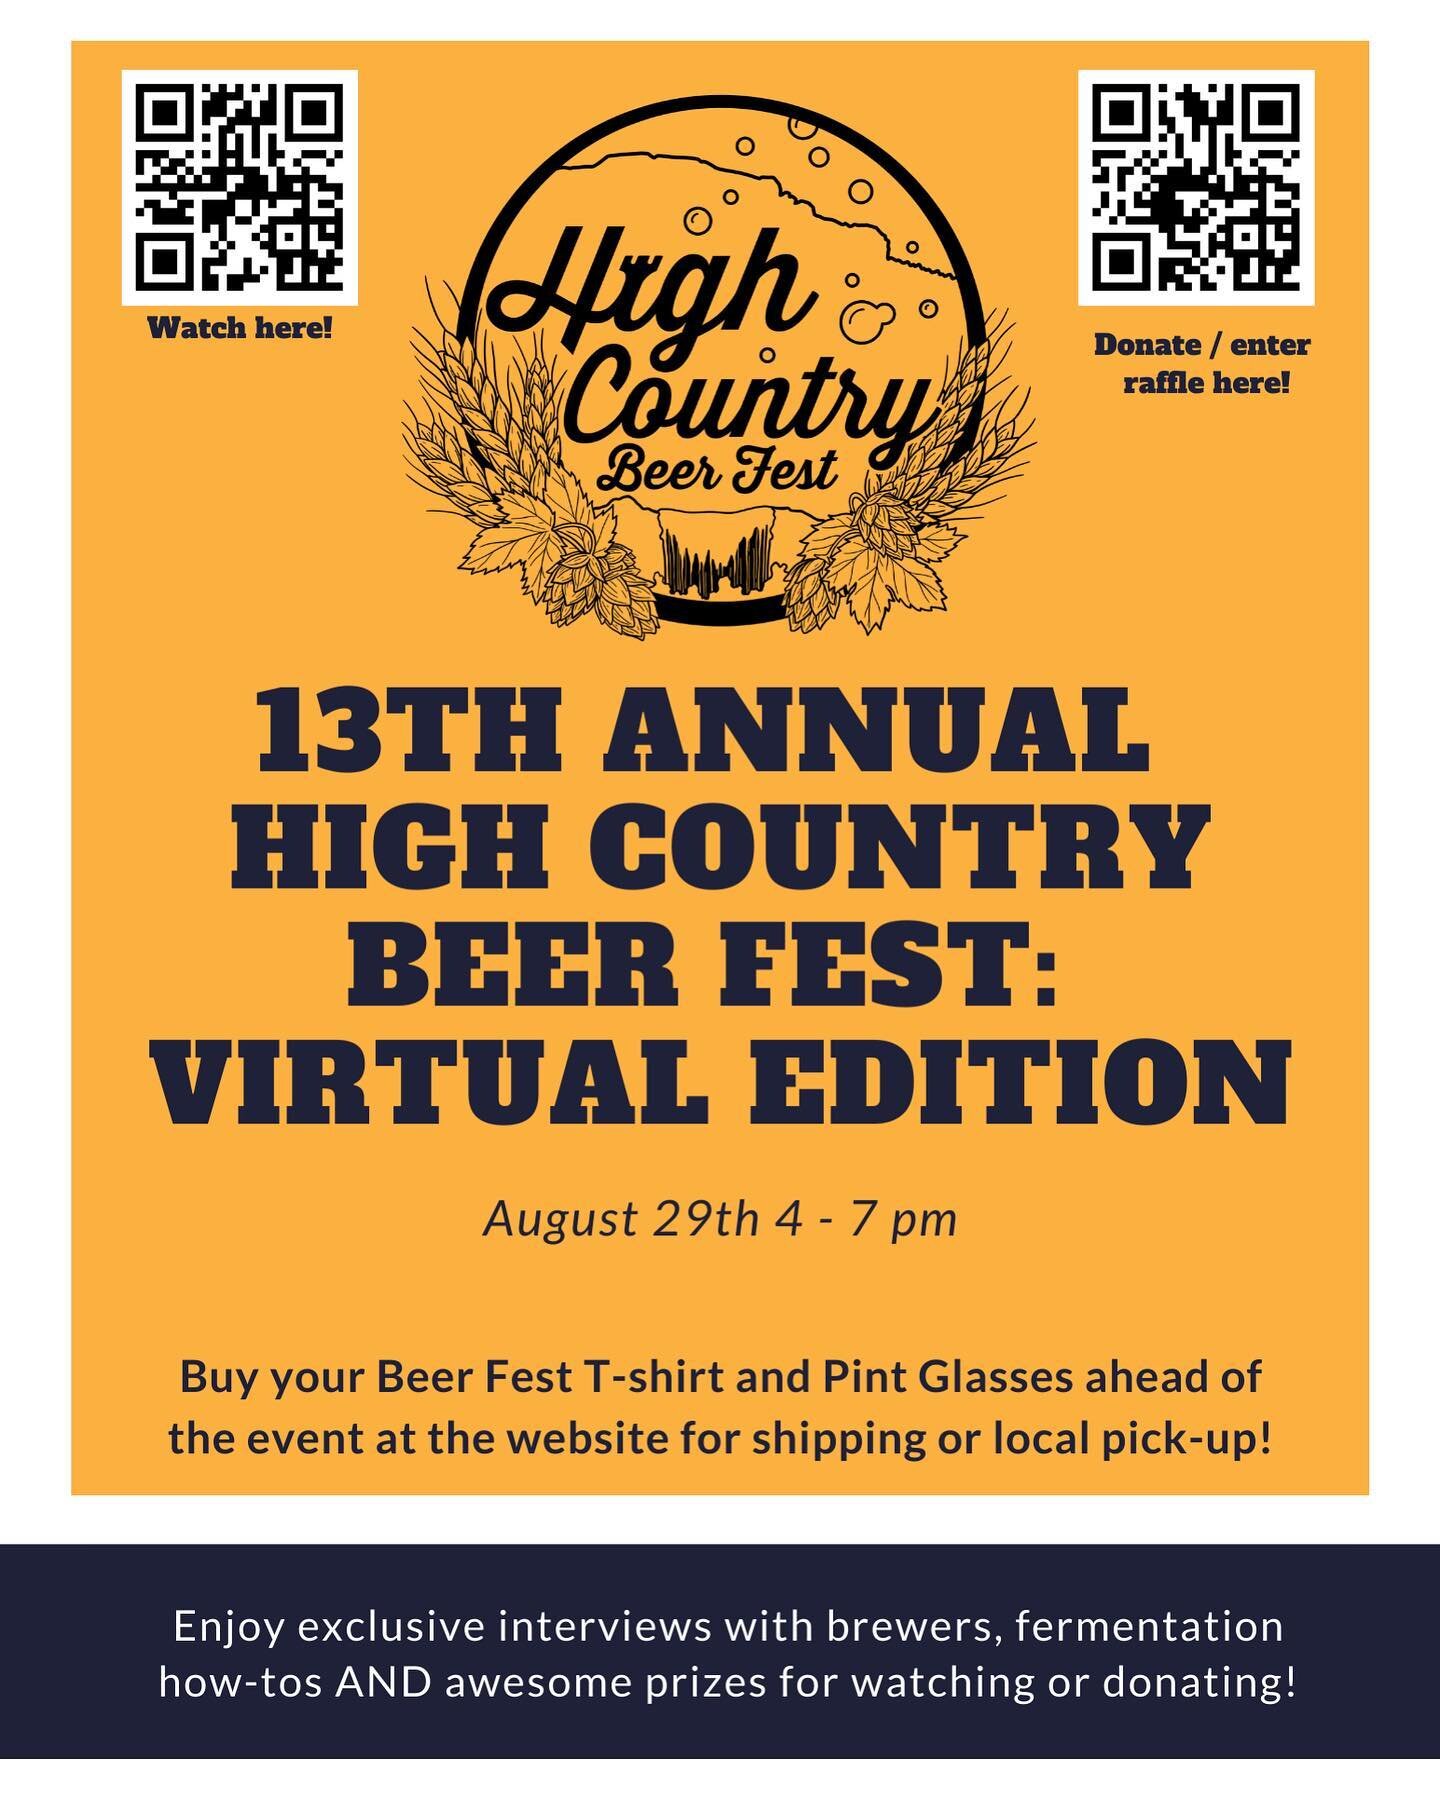 We are officially less than a week away from our Virtual Beer Fest! Stick around this week for more details and information about ways to watch and prizes for donating! 🍻 We can&rsquo;t wait to see you all (virtually) on August 29th from 4-7! #hcbee